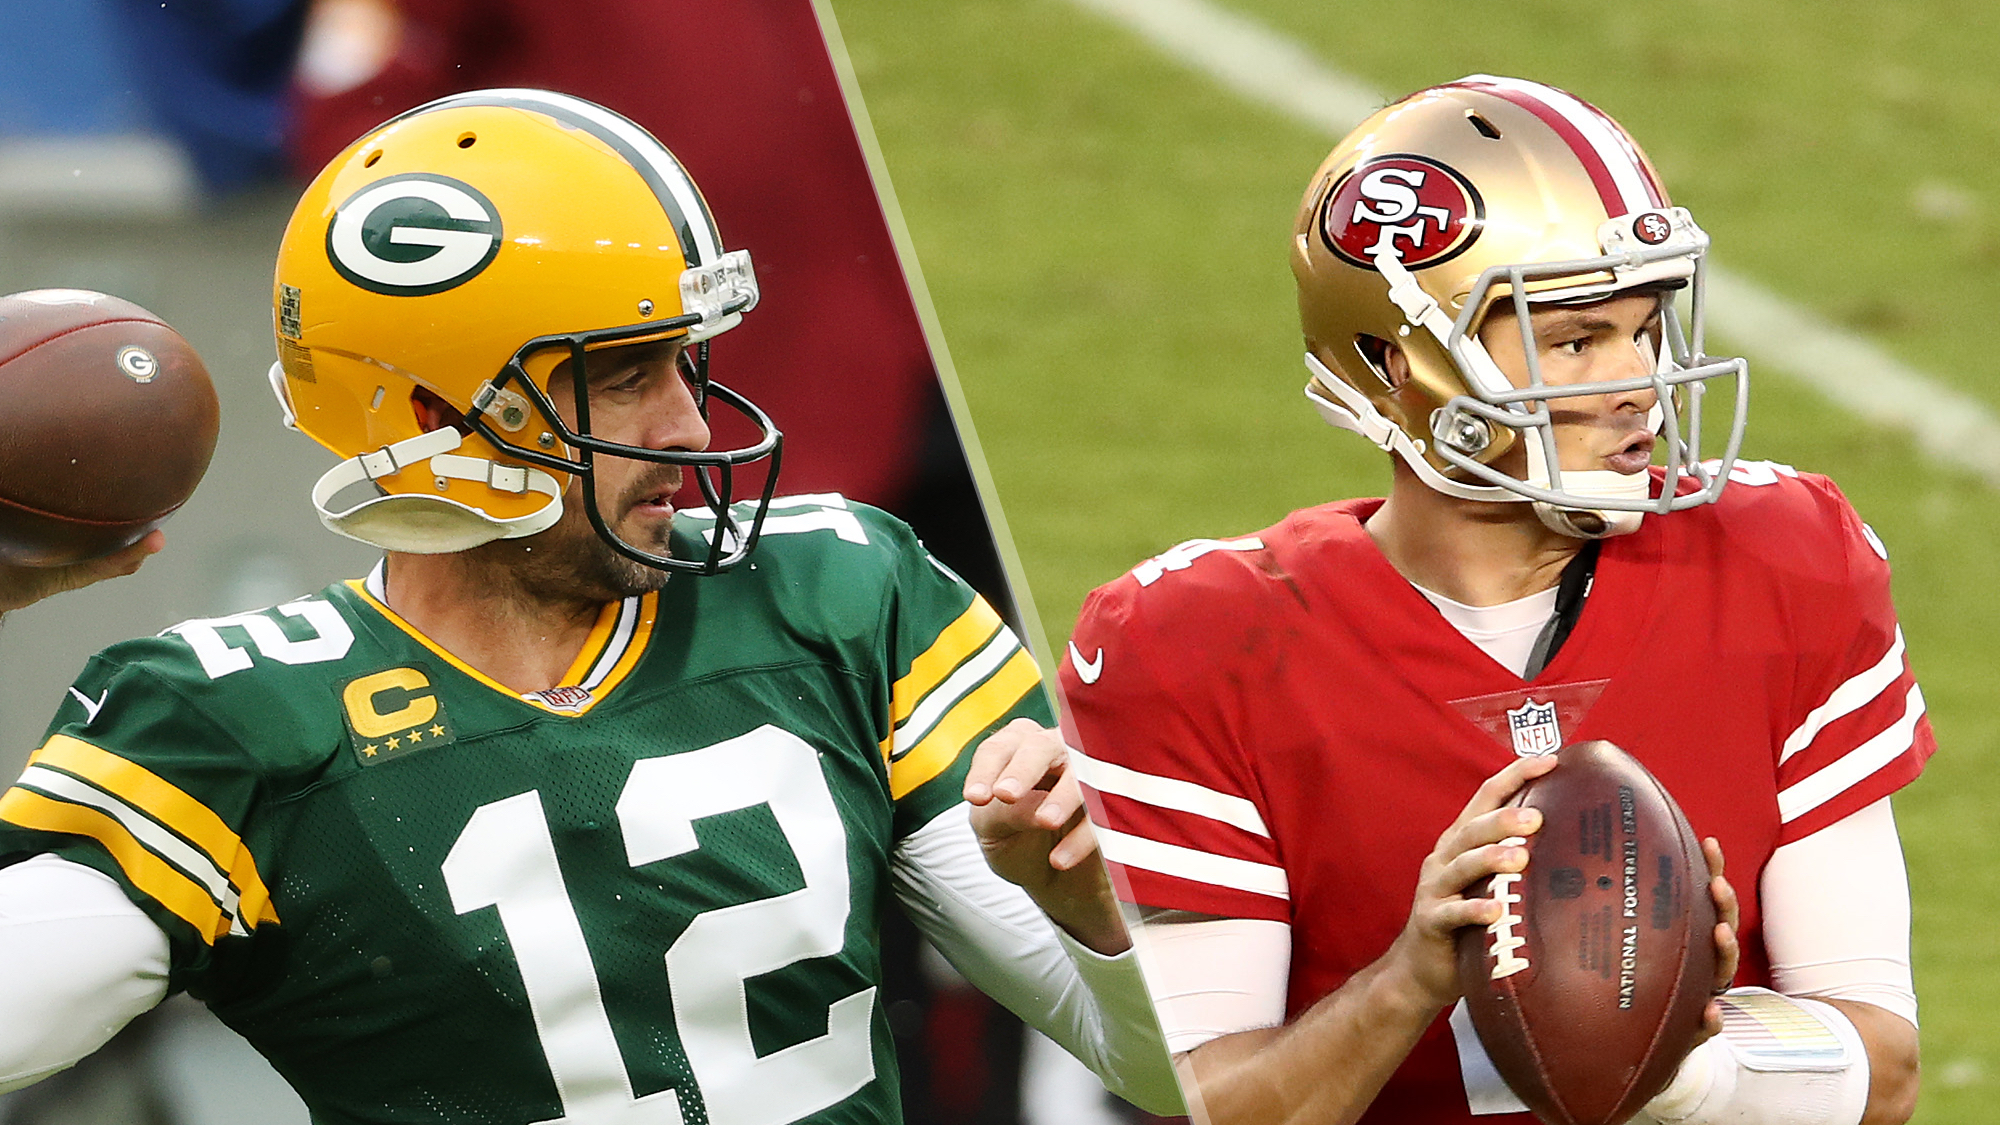 packers 49ers how to watch